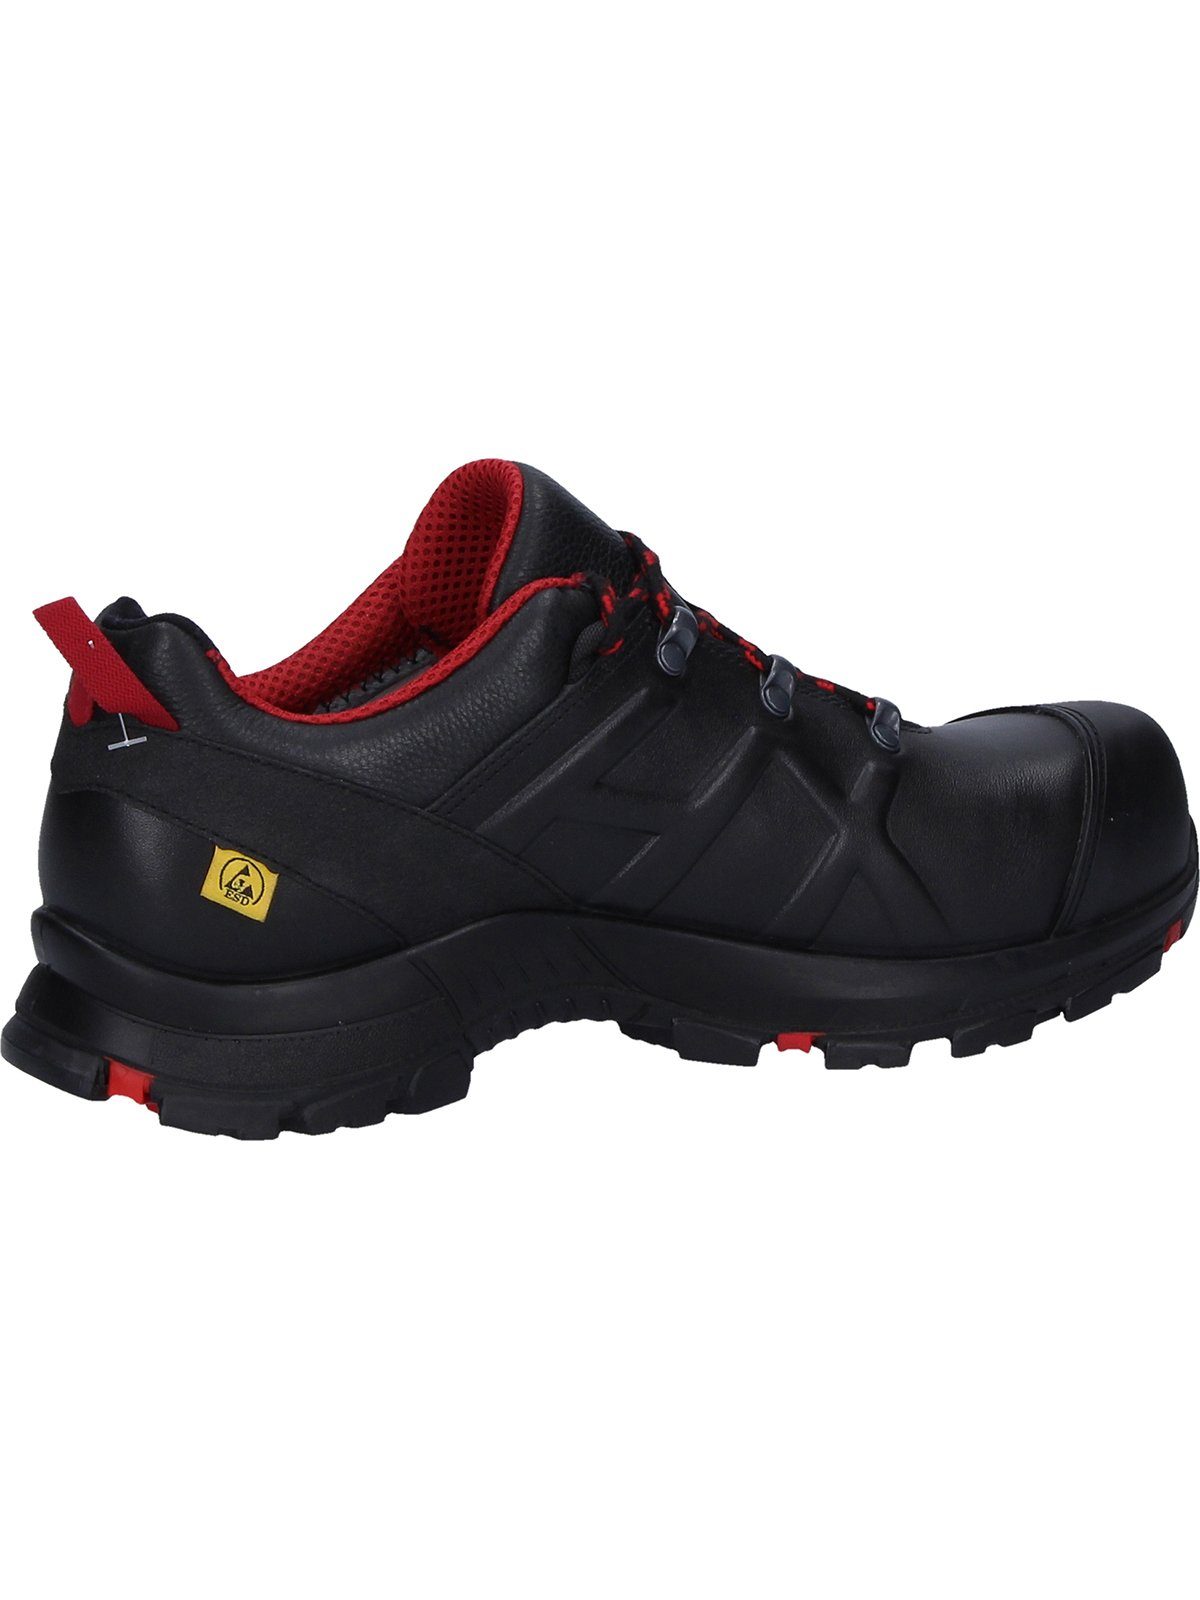 Safety Eagle Arbeitsschuh black/red low 54 Black haix